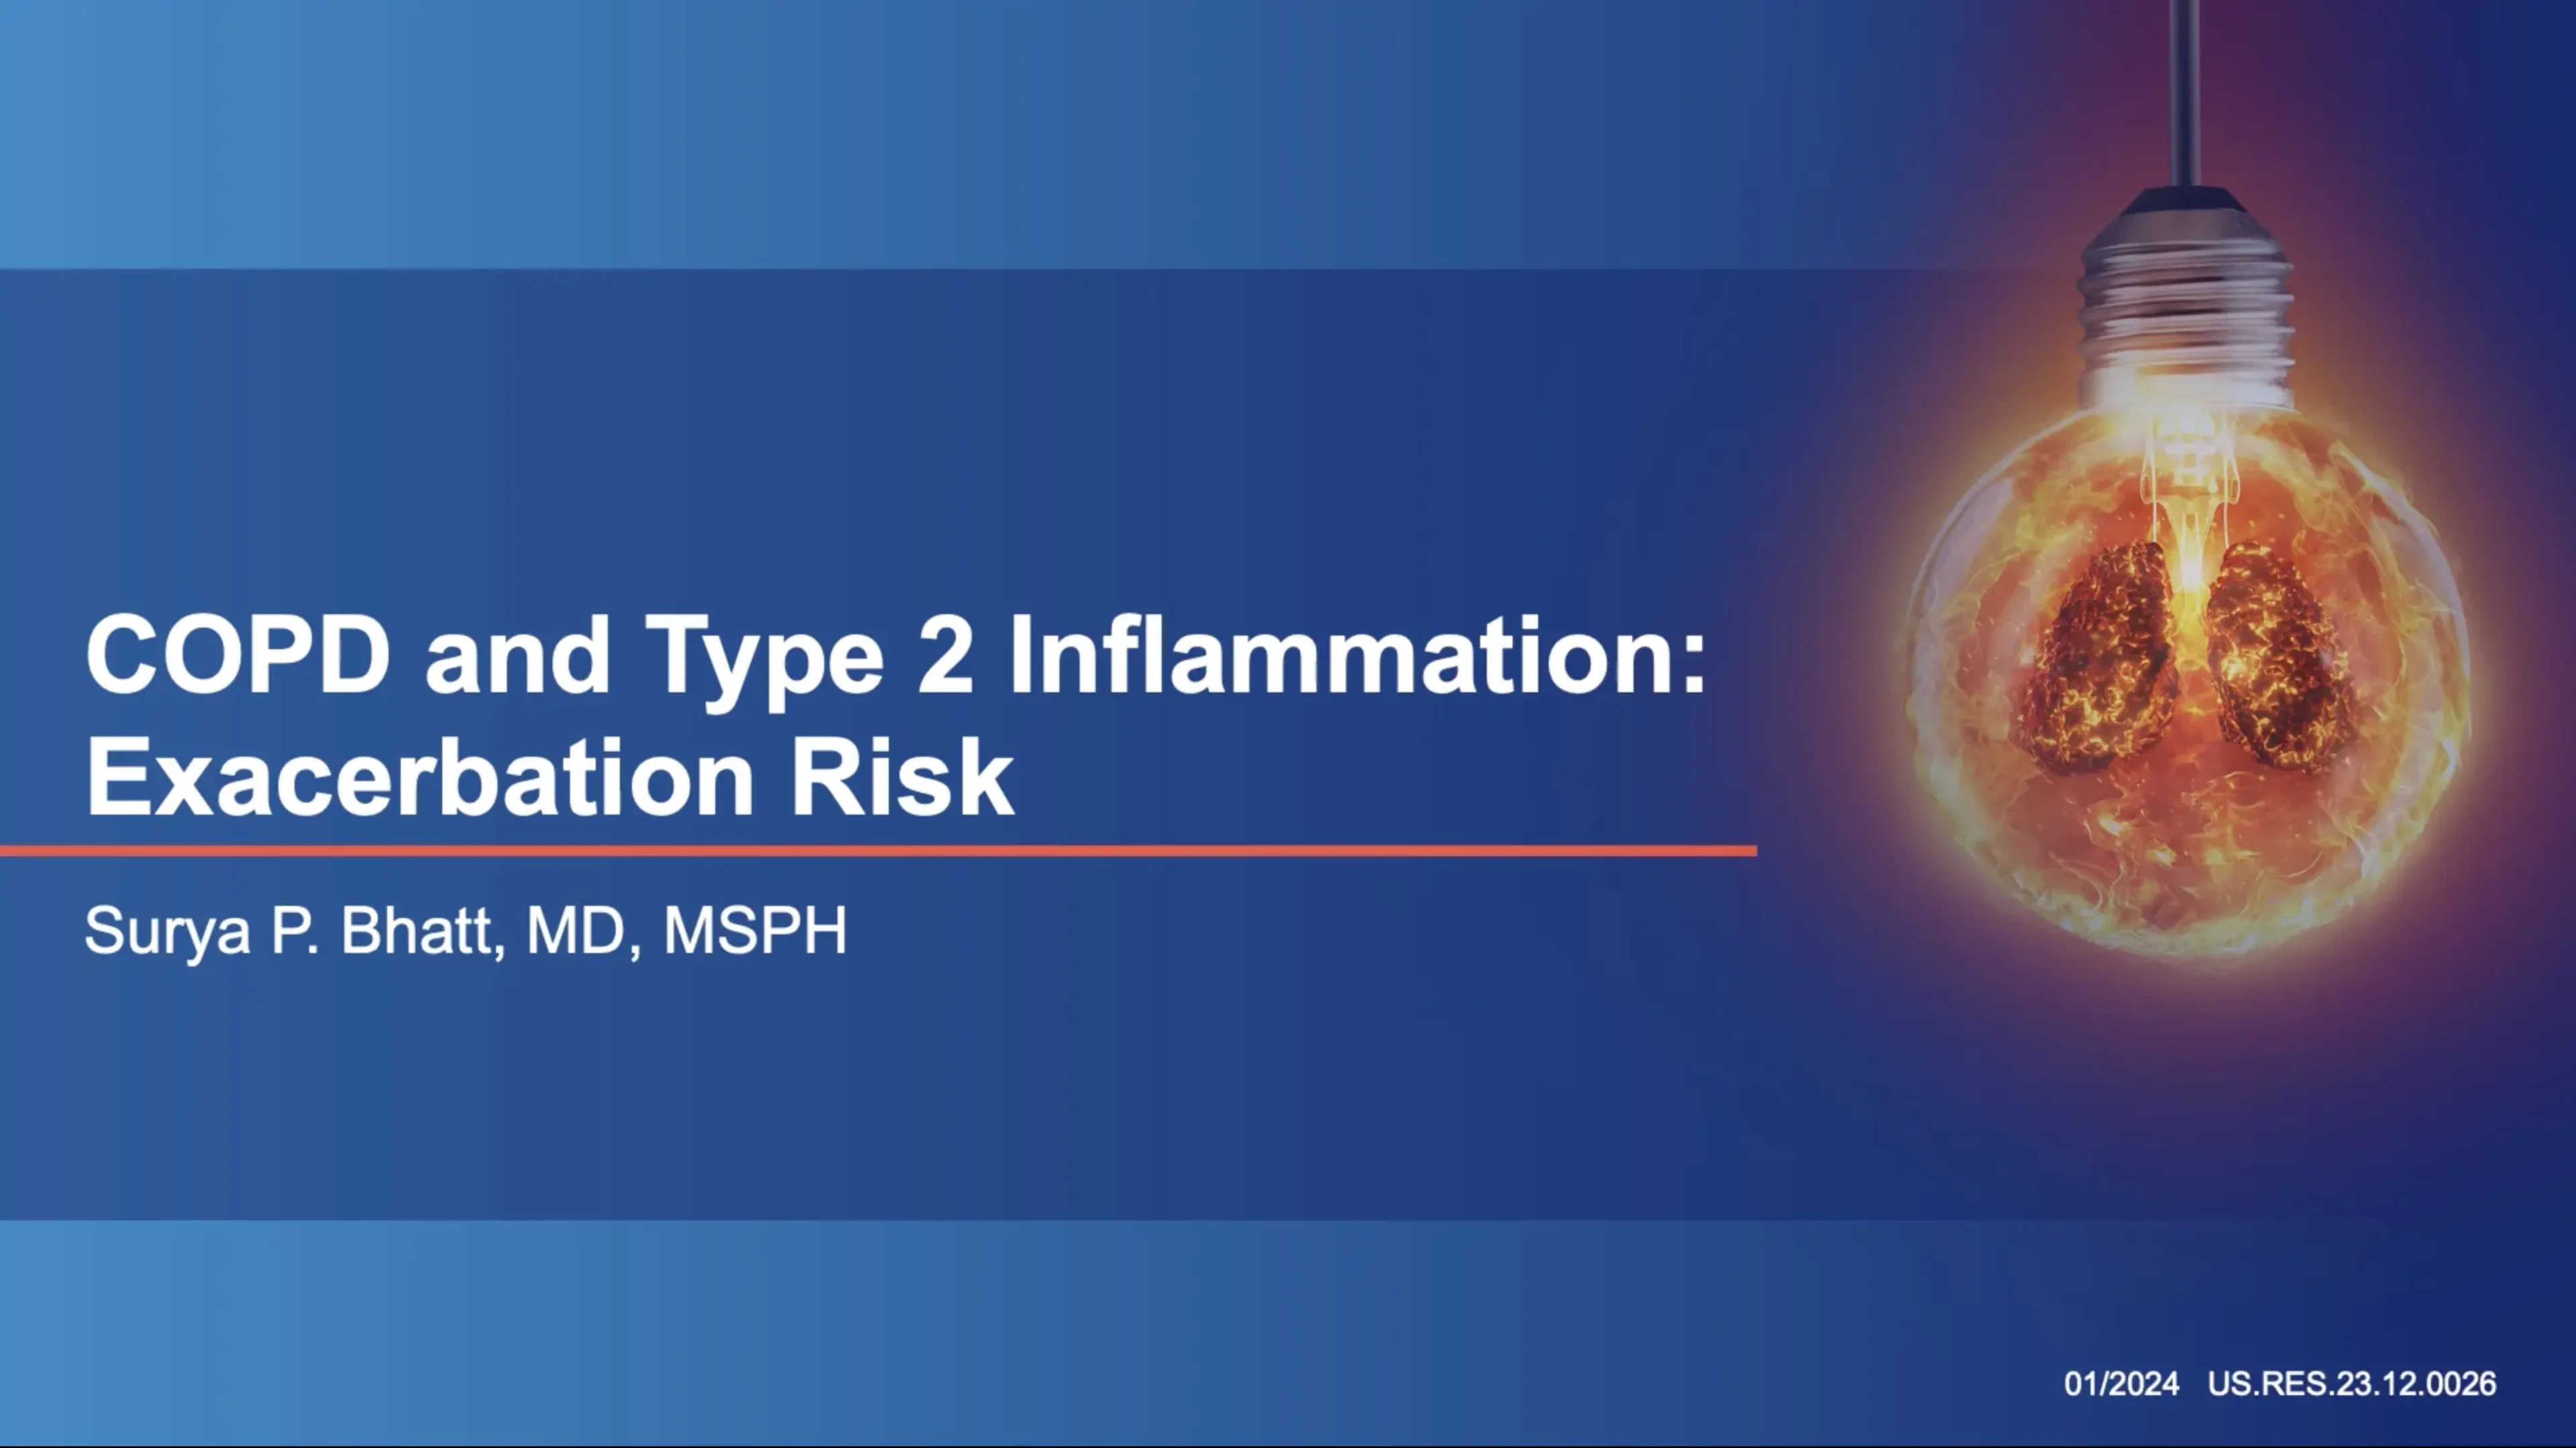 COPD and Type 2 Inflammation: exacerbation risk